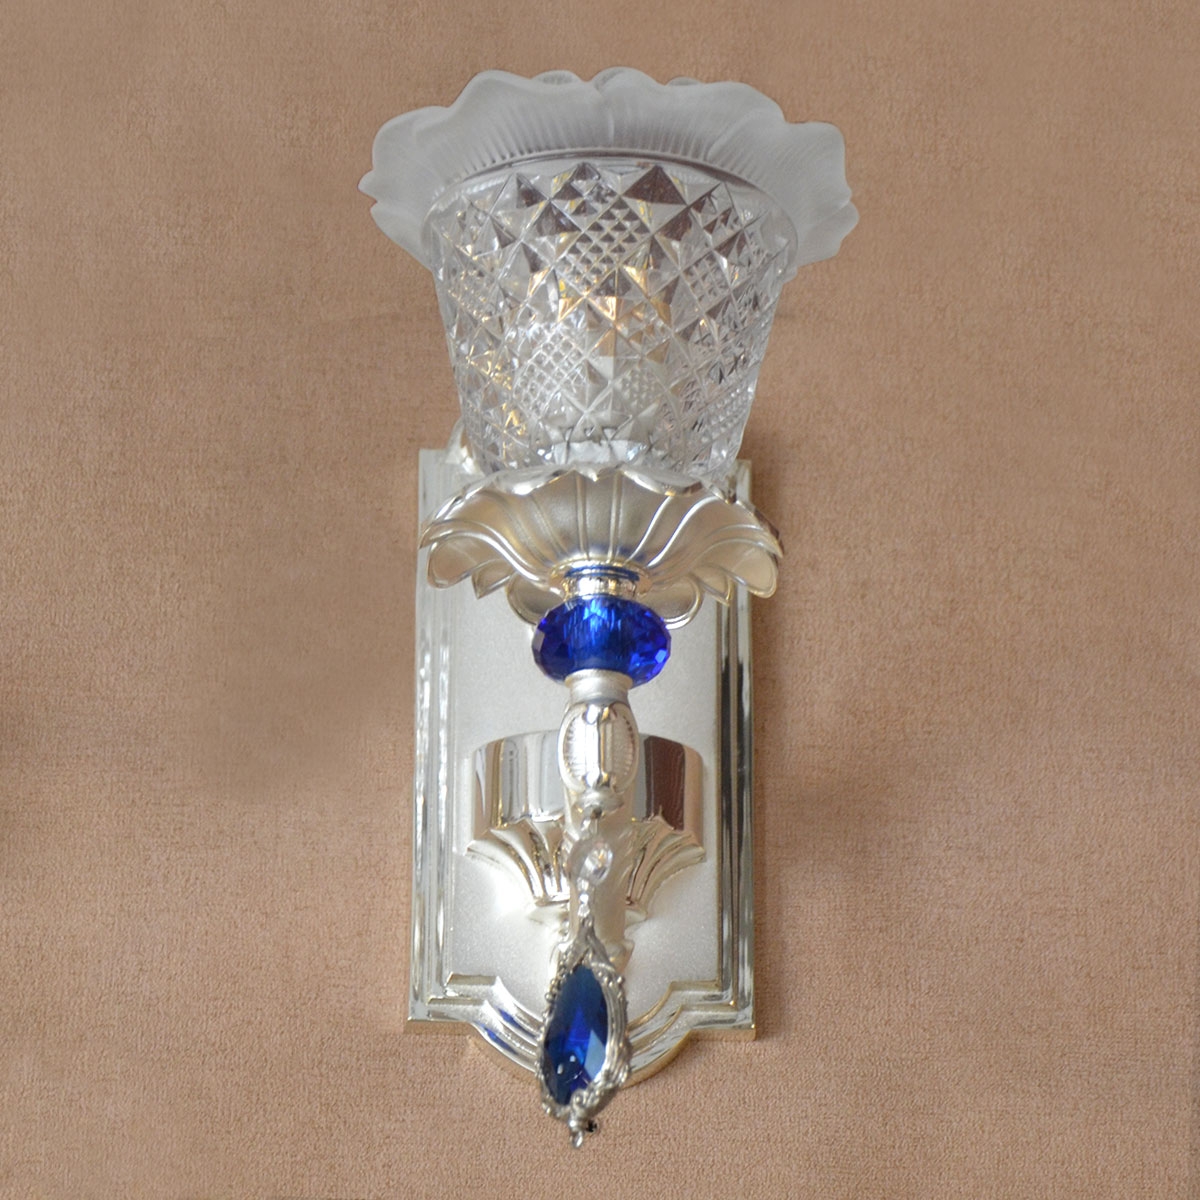 Indoor Glass Candle Wall Light -JHW71023-1-Silver